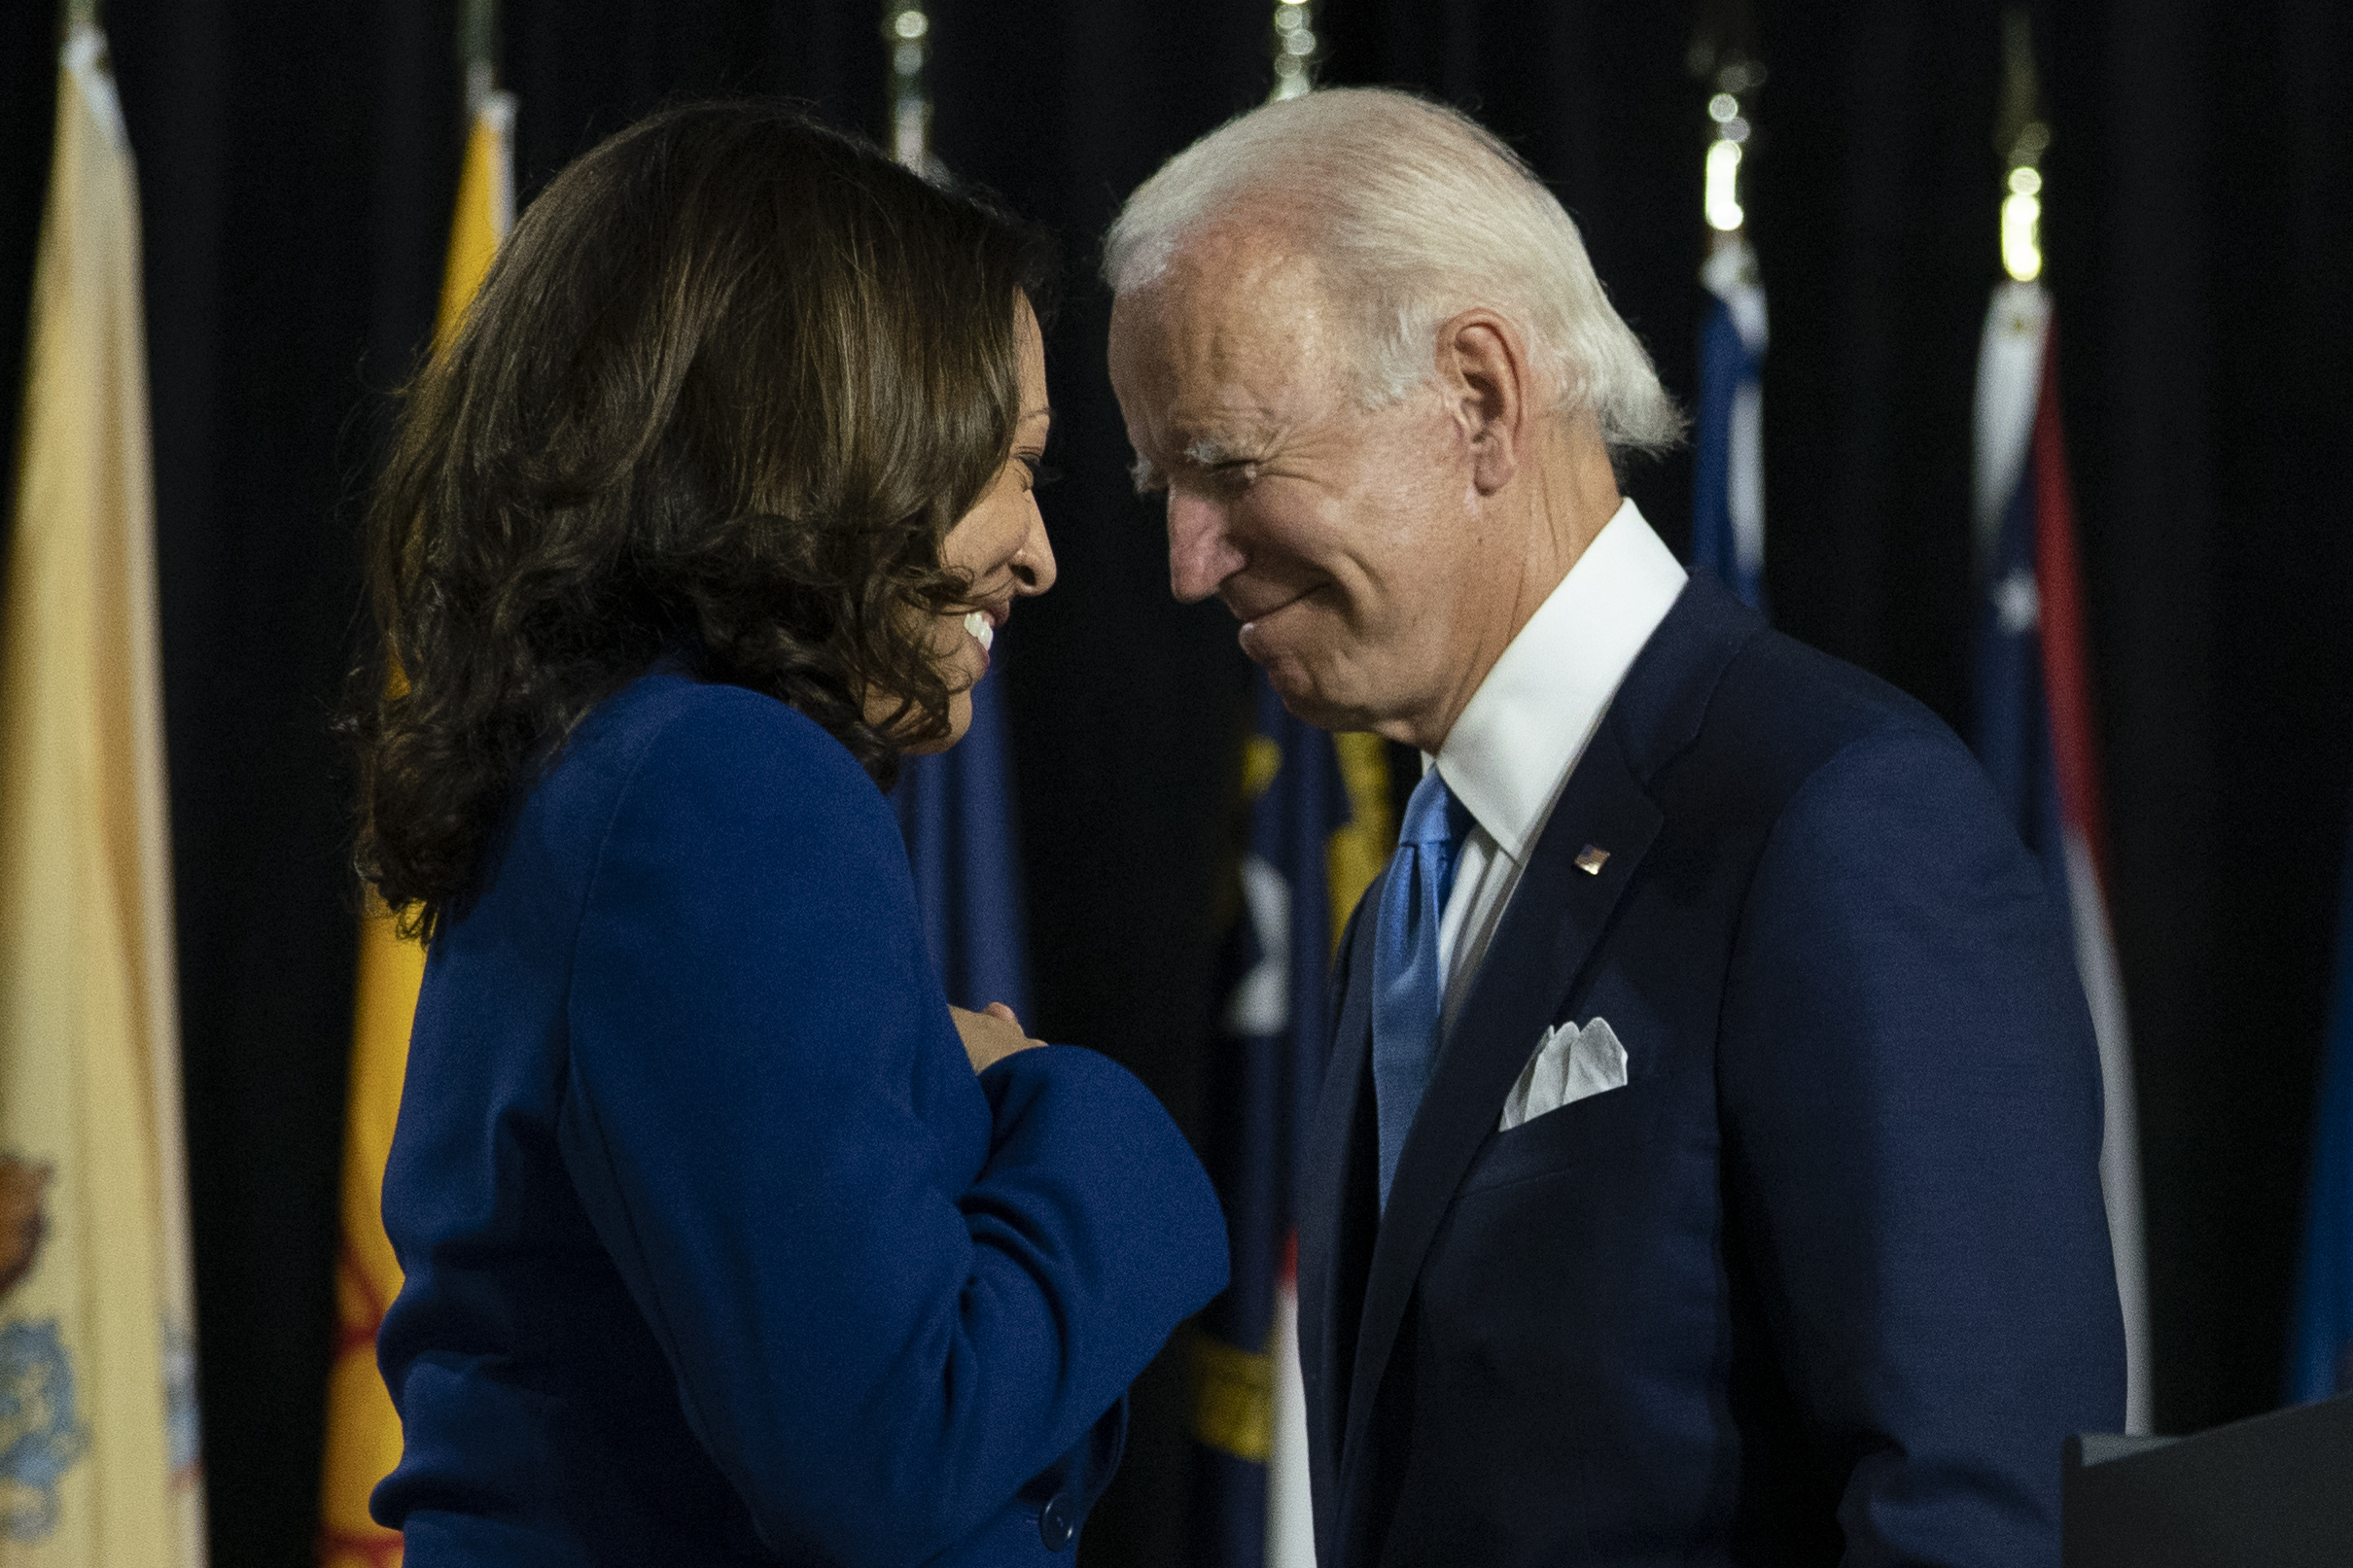 PHOTO: Former Vice President Joe Biden and his running mate Sen. Kamala Harris, D-Calif., pass each other as Harris moves to the podium to speak during a campaign event at Alexis Dupont High School in Wilmington, Del., Wednesday, Aug. 12, 2020.